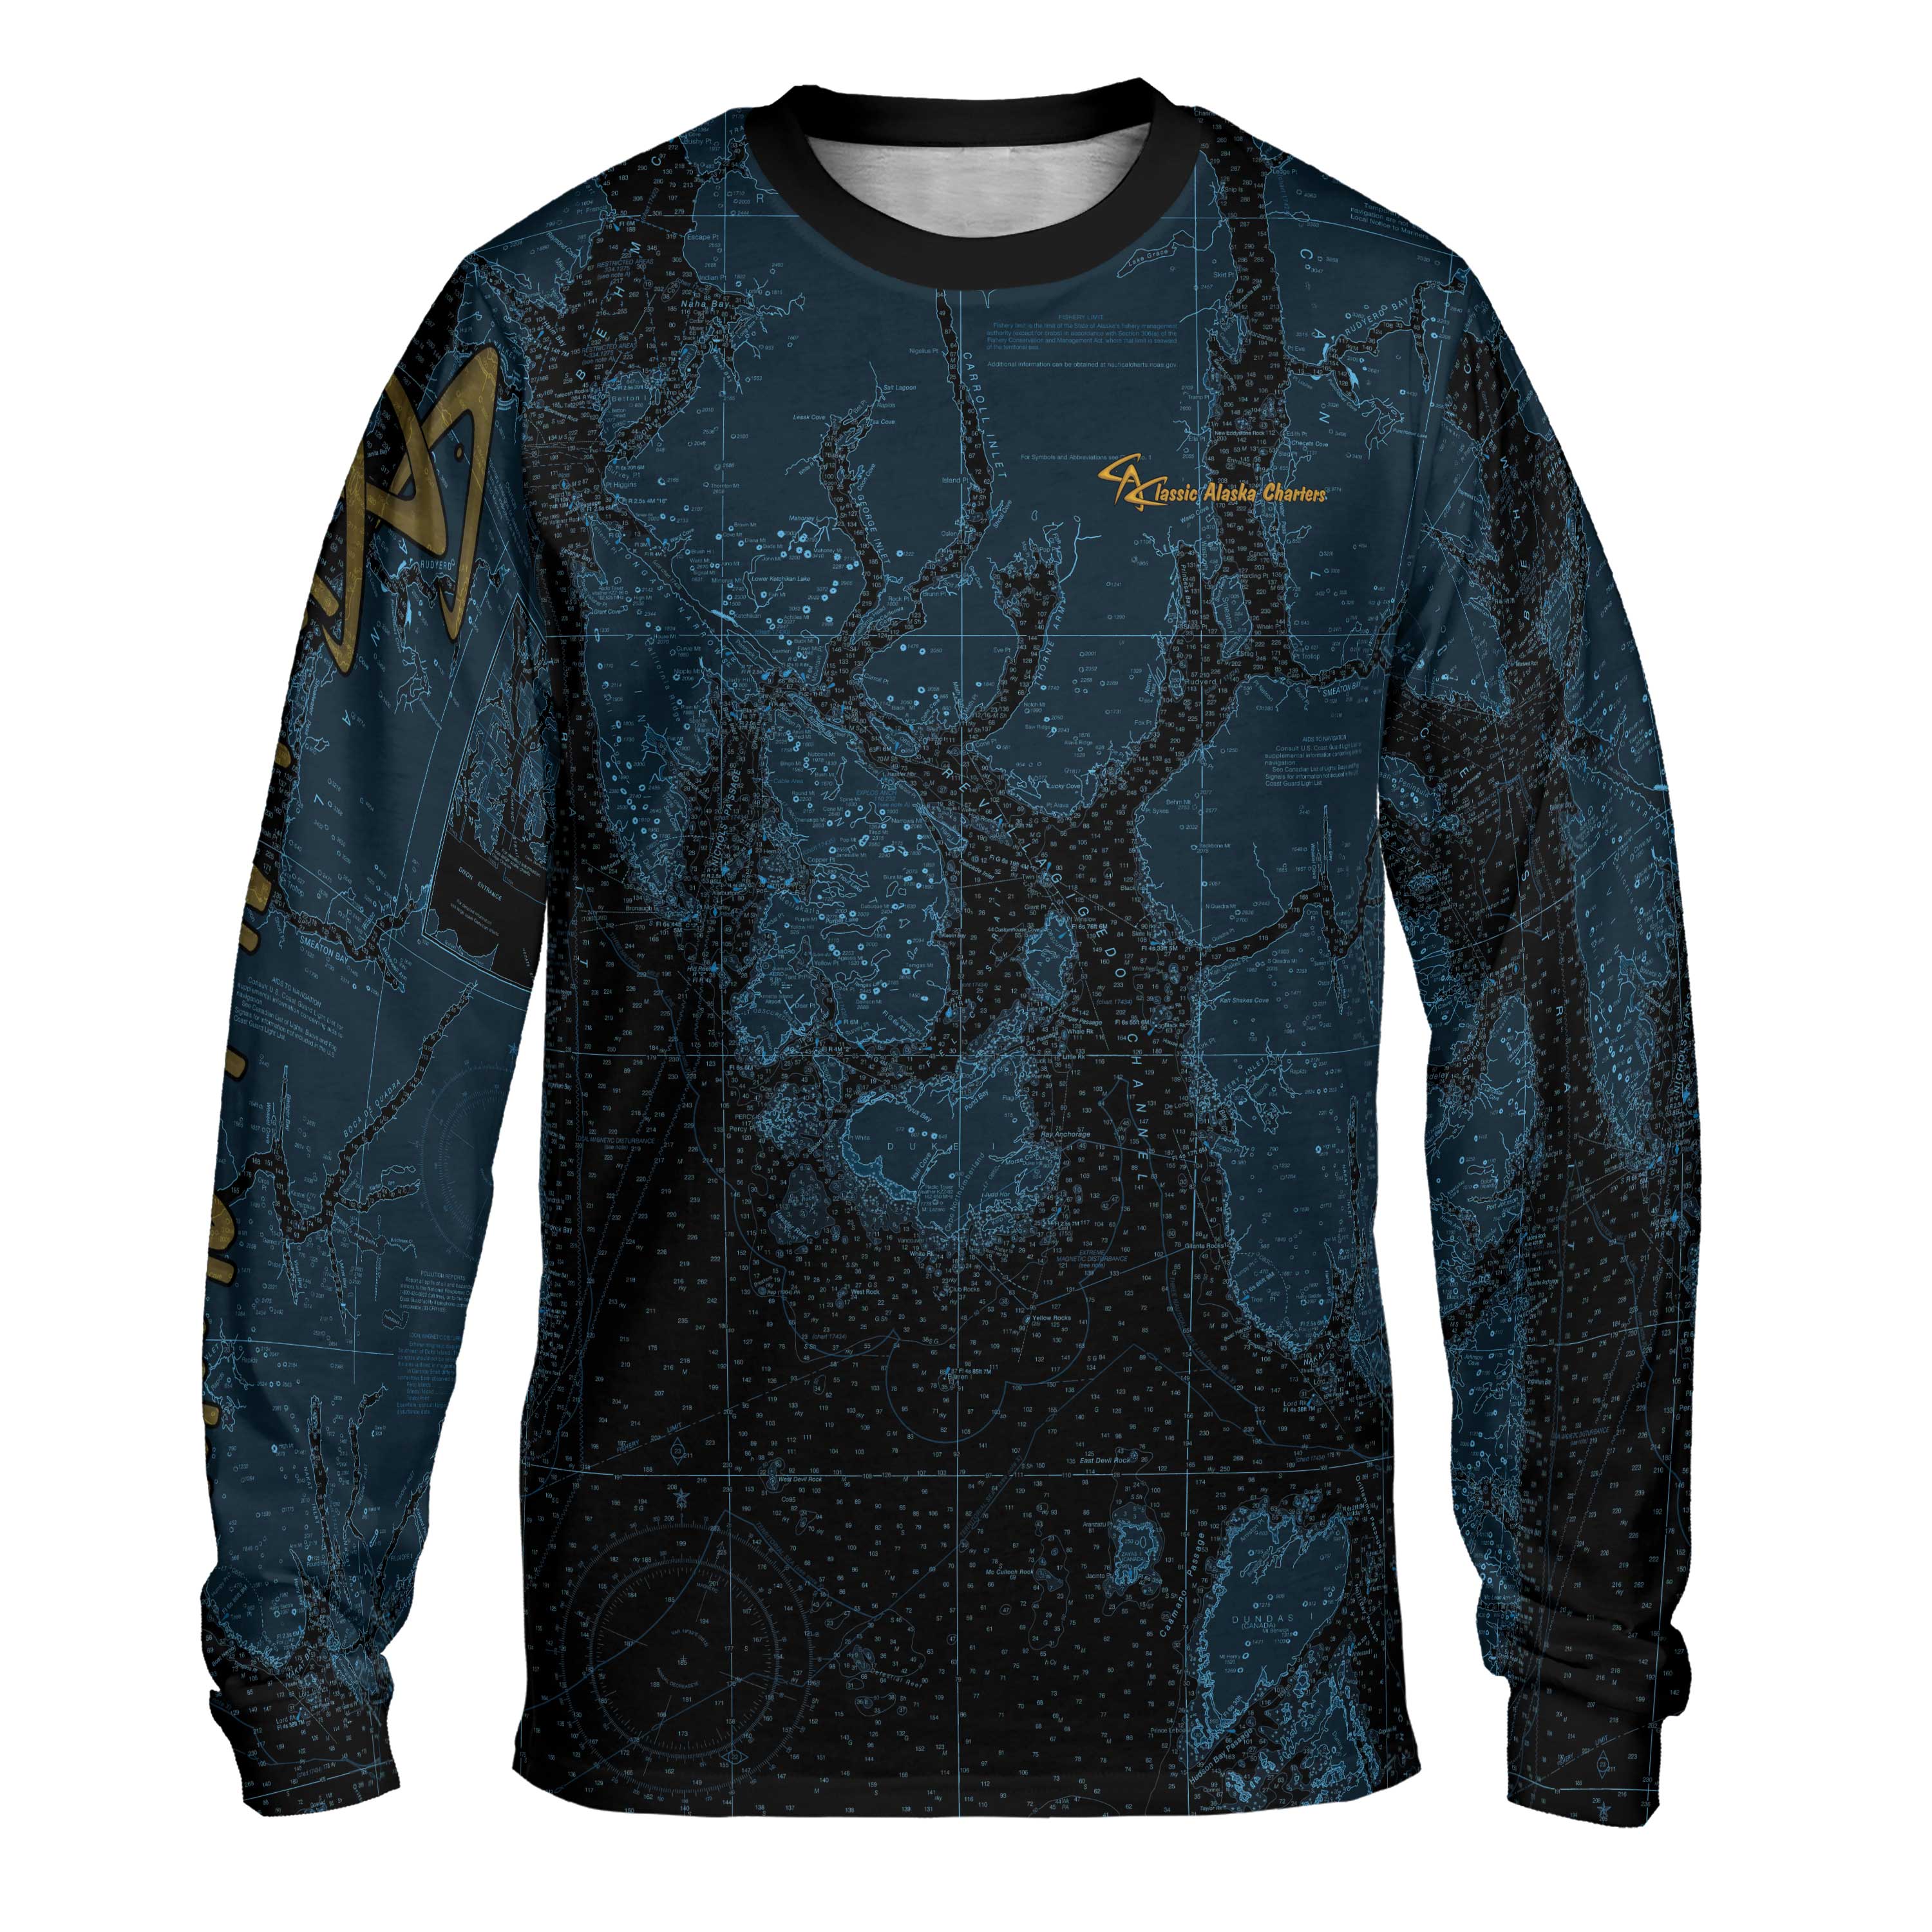 The CAC Midnight Blue Ketchikan Youth Long Sleeve Performance Tee